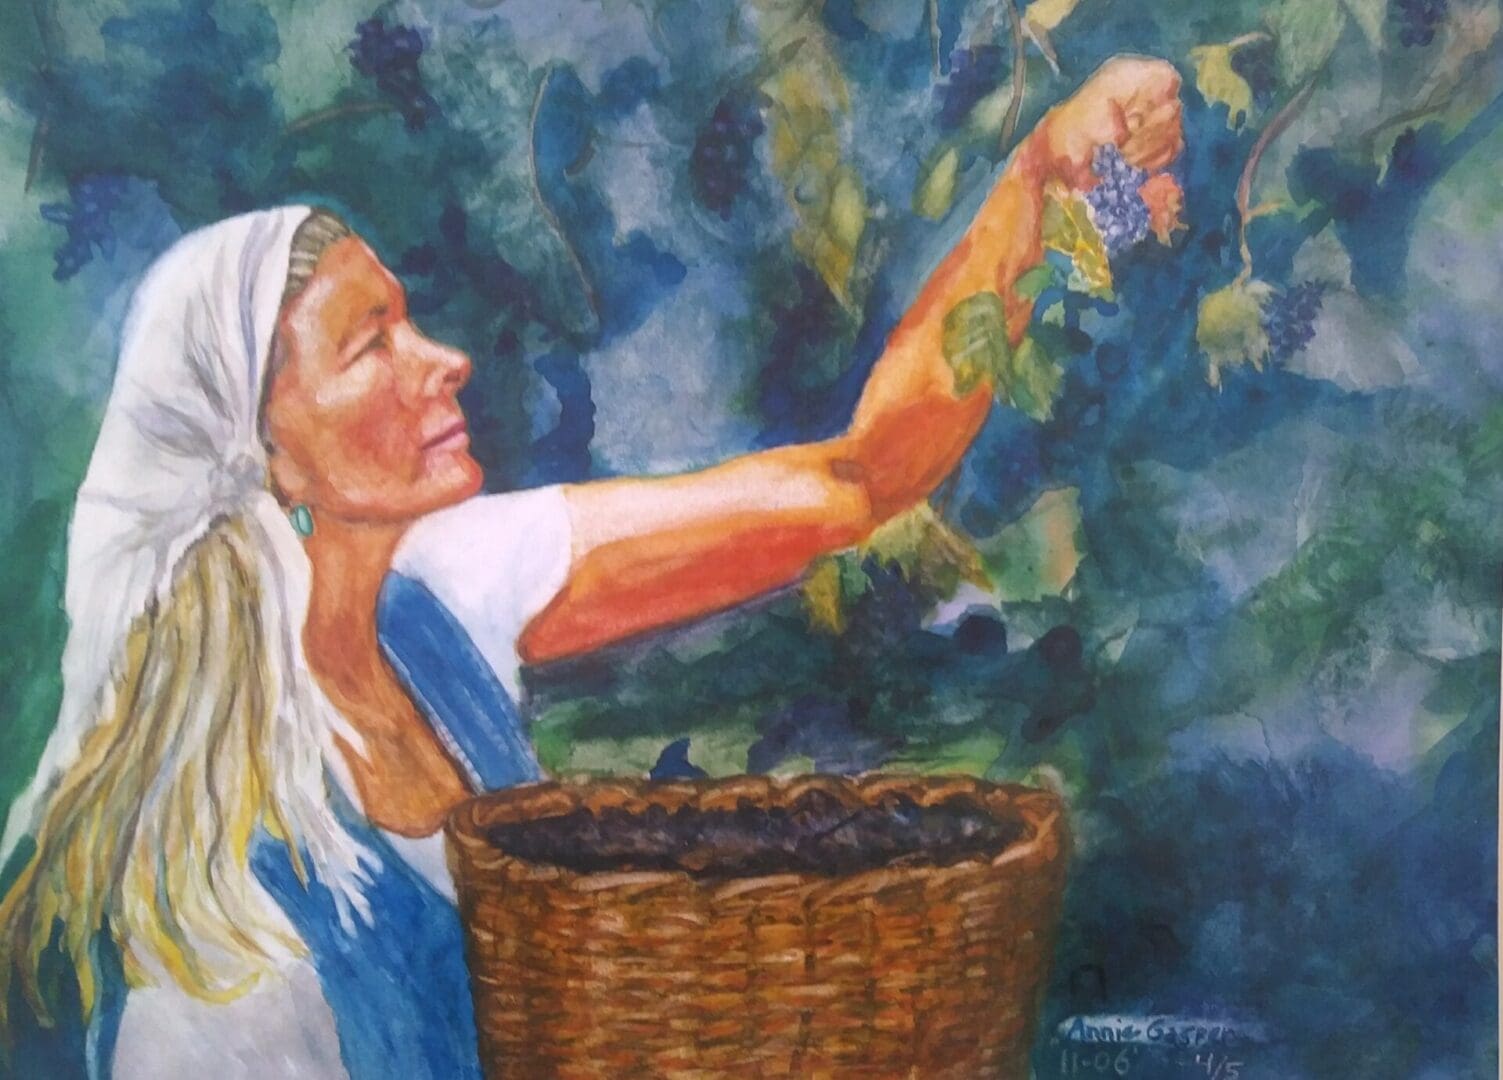 A painting of a woman picking grapes from a basket.